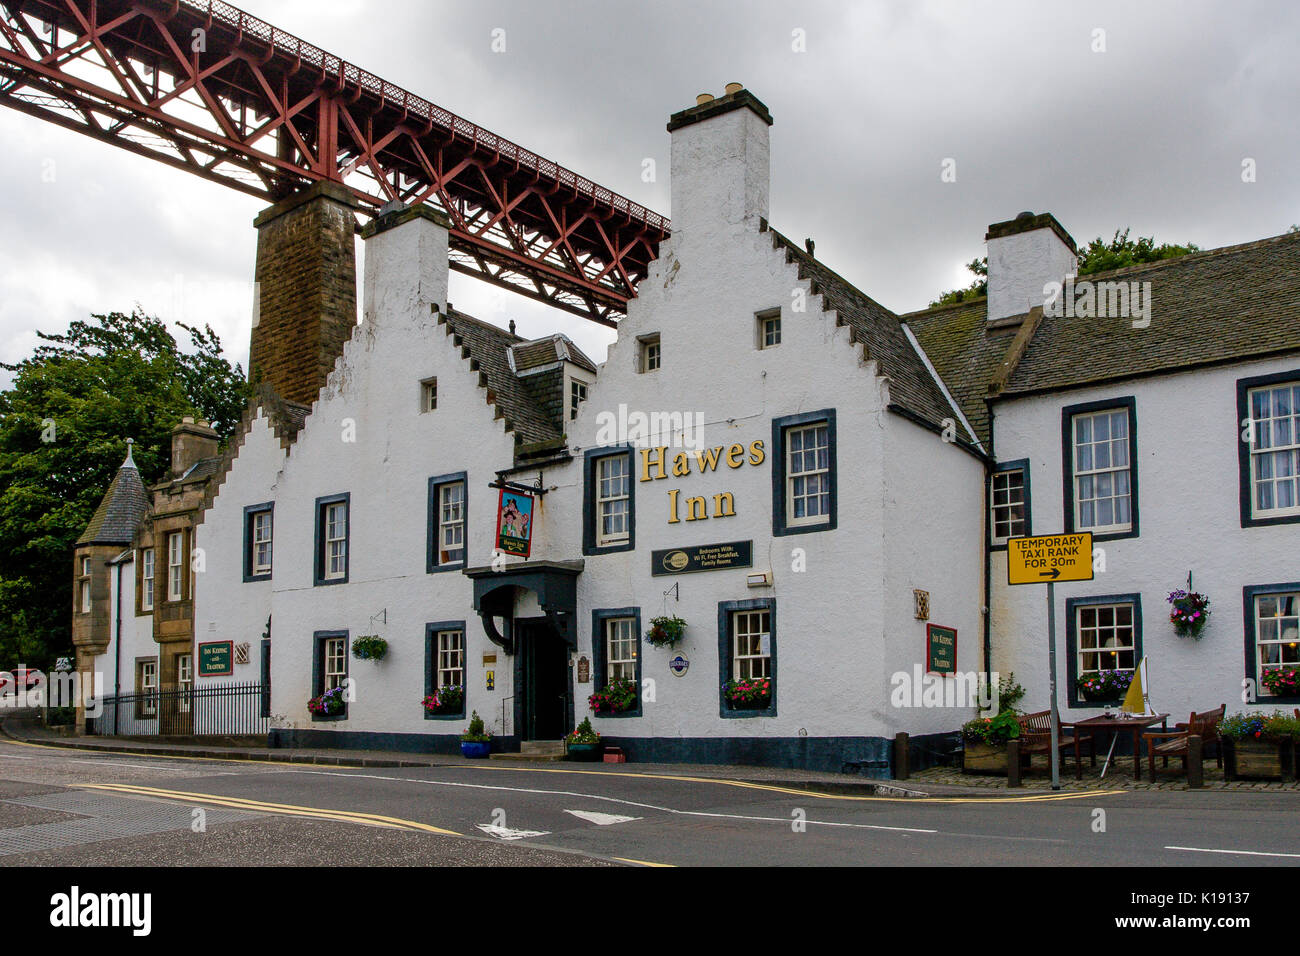 Stylish The Hawes Inn a country pub situated almost under the Forth Rail Bridge in South Queensferry Edinburgh Scotland Stock Photo